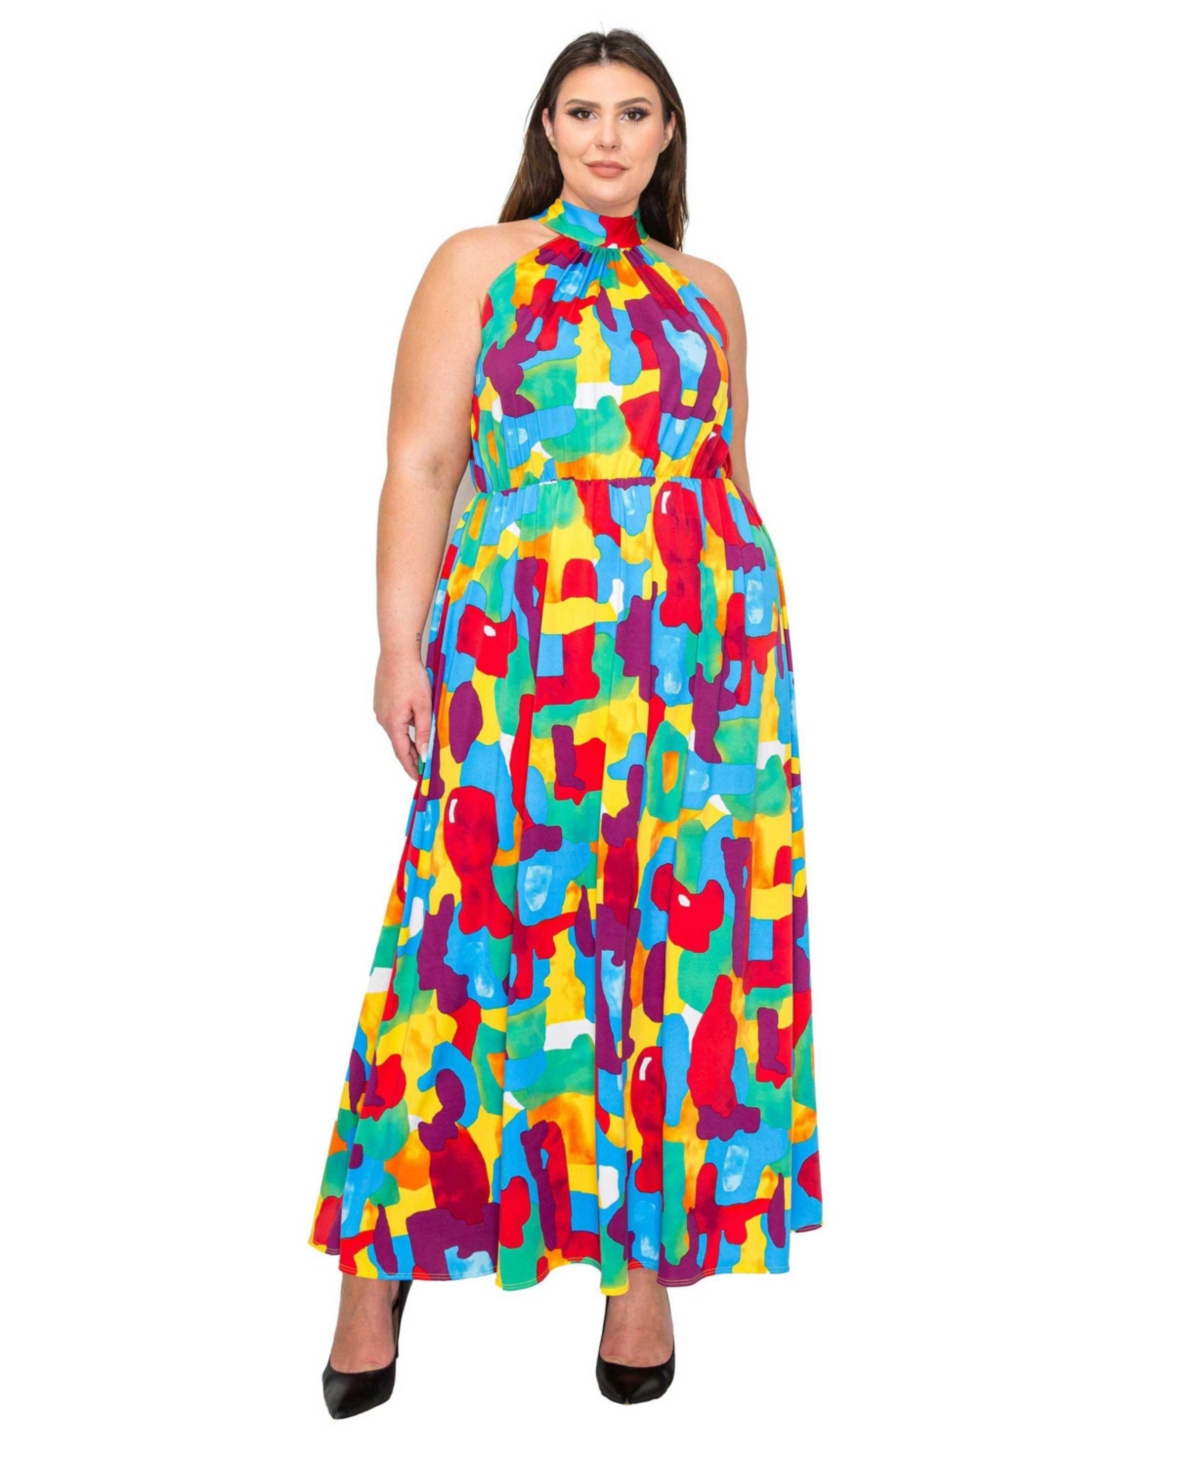 Plus Size Arroyo Halter Neck Maxi Dress in Abstract Print - Yellow turquoise red